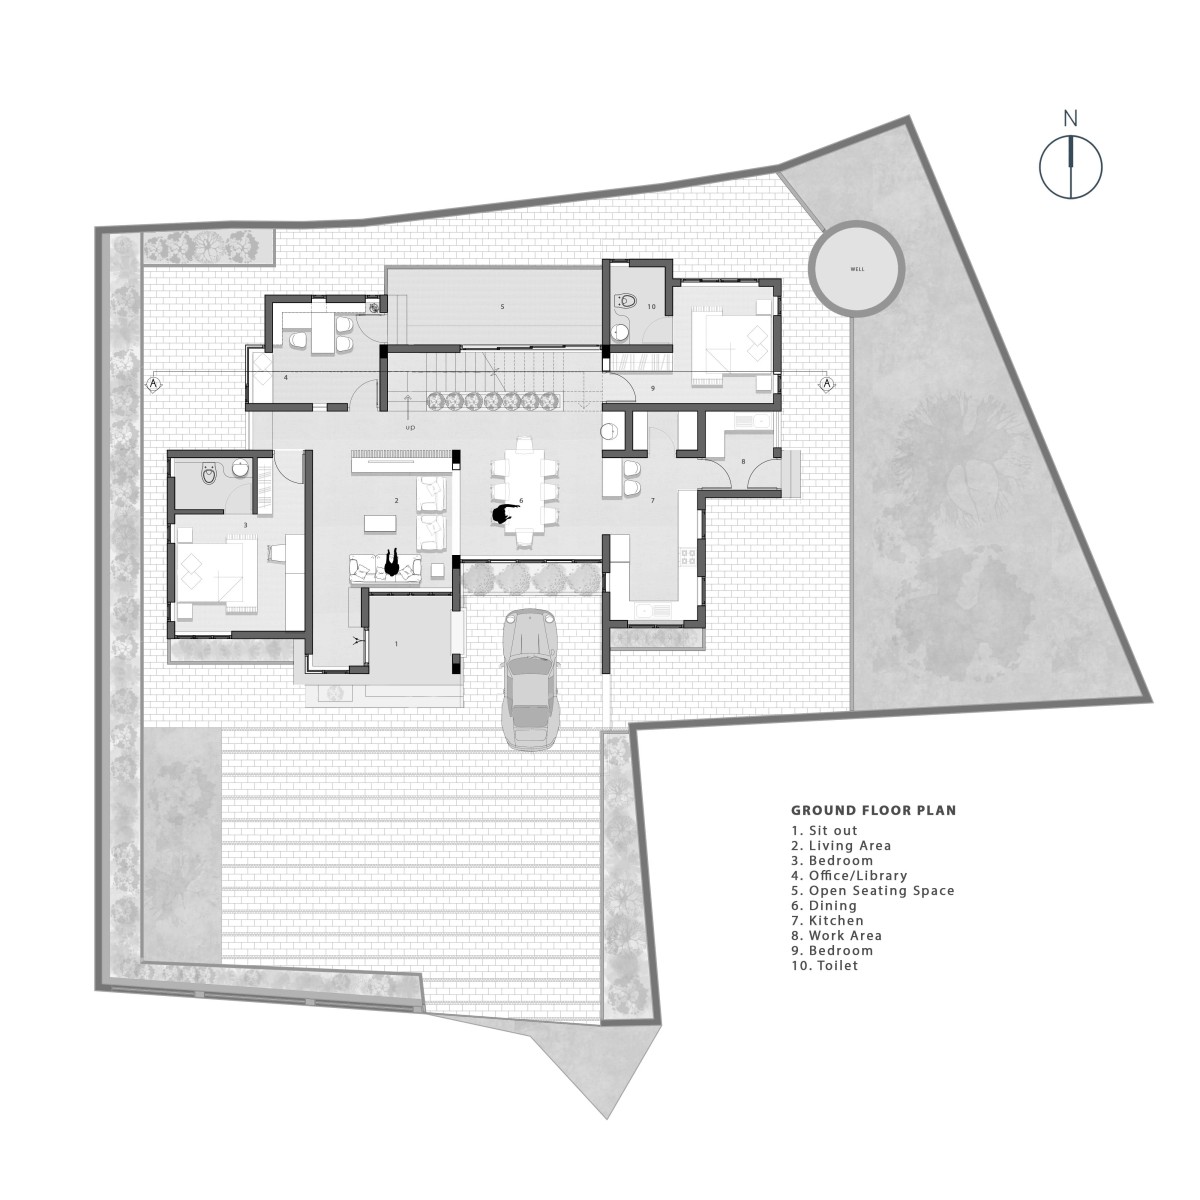 Ground floor plan of Meghamalhar by T Square Architects